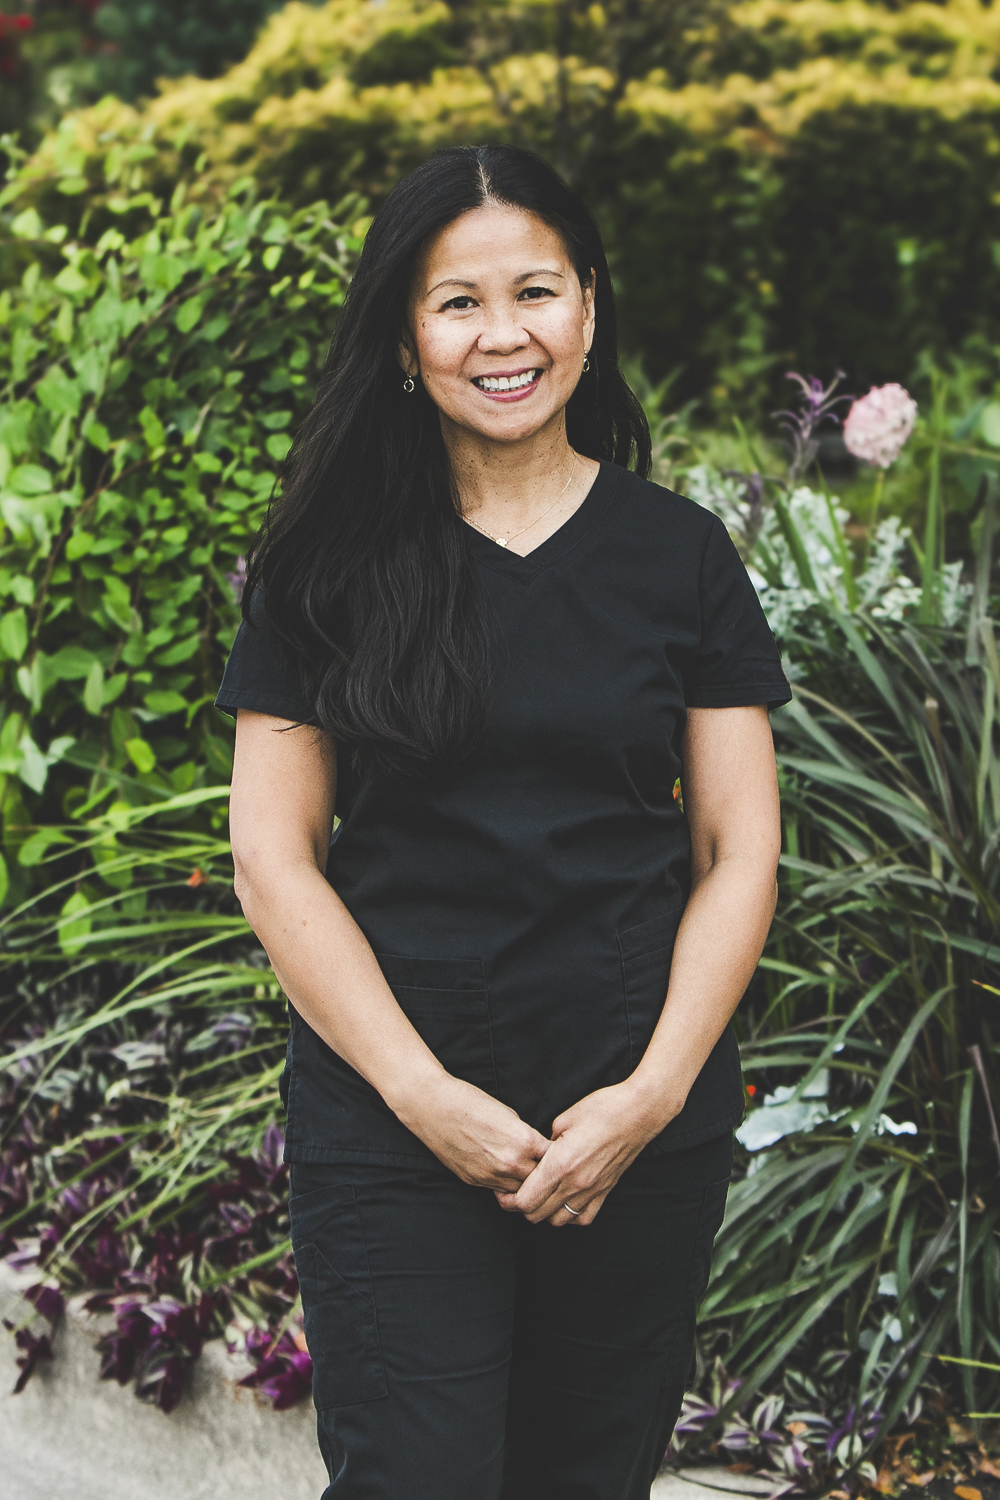 A woman with a medium complexion, long, dark straight black hair and wearing a black medical outfit is seen standing in front of an urban garden on a bright summer day